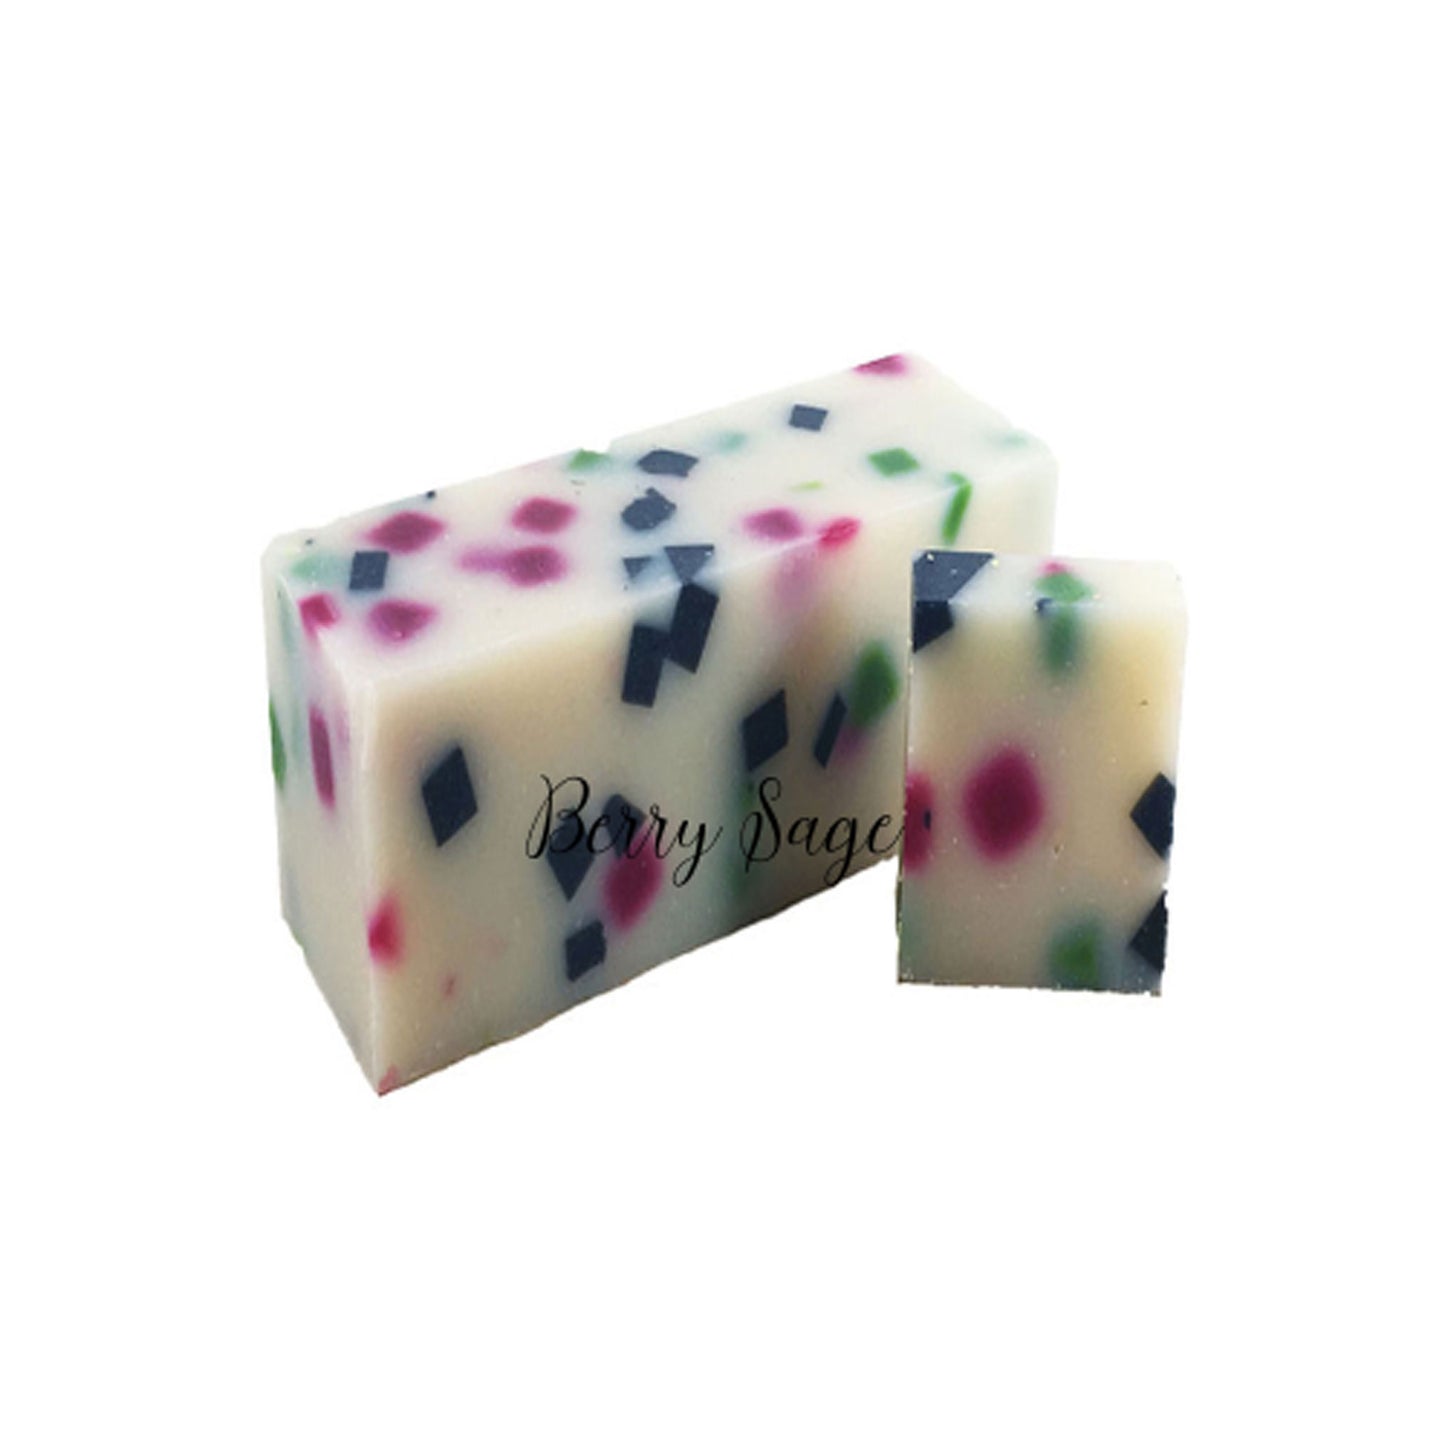 4.5 oz bar soap A beautiful blend of our top berry fragrances with nice sage undertones.